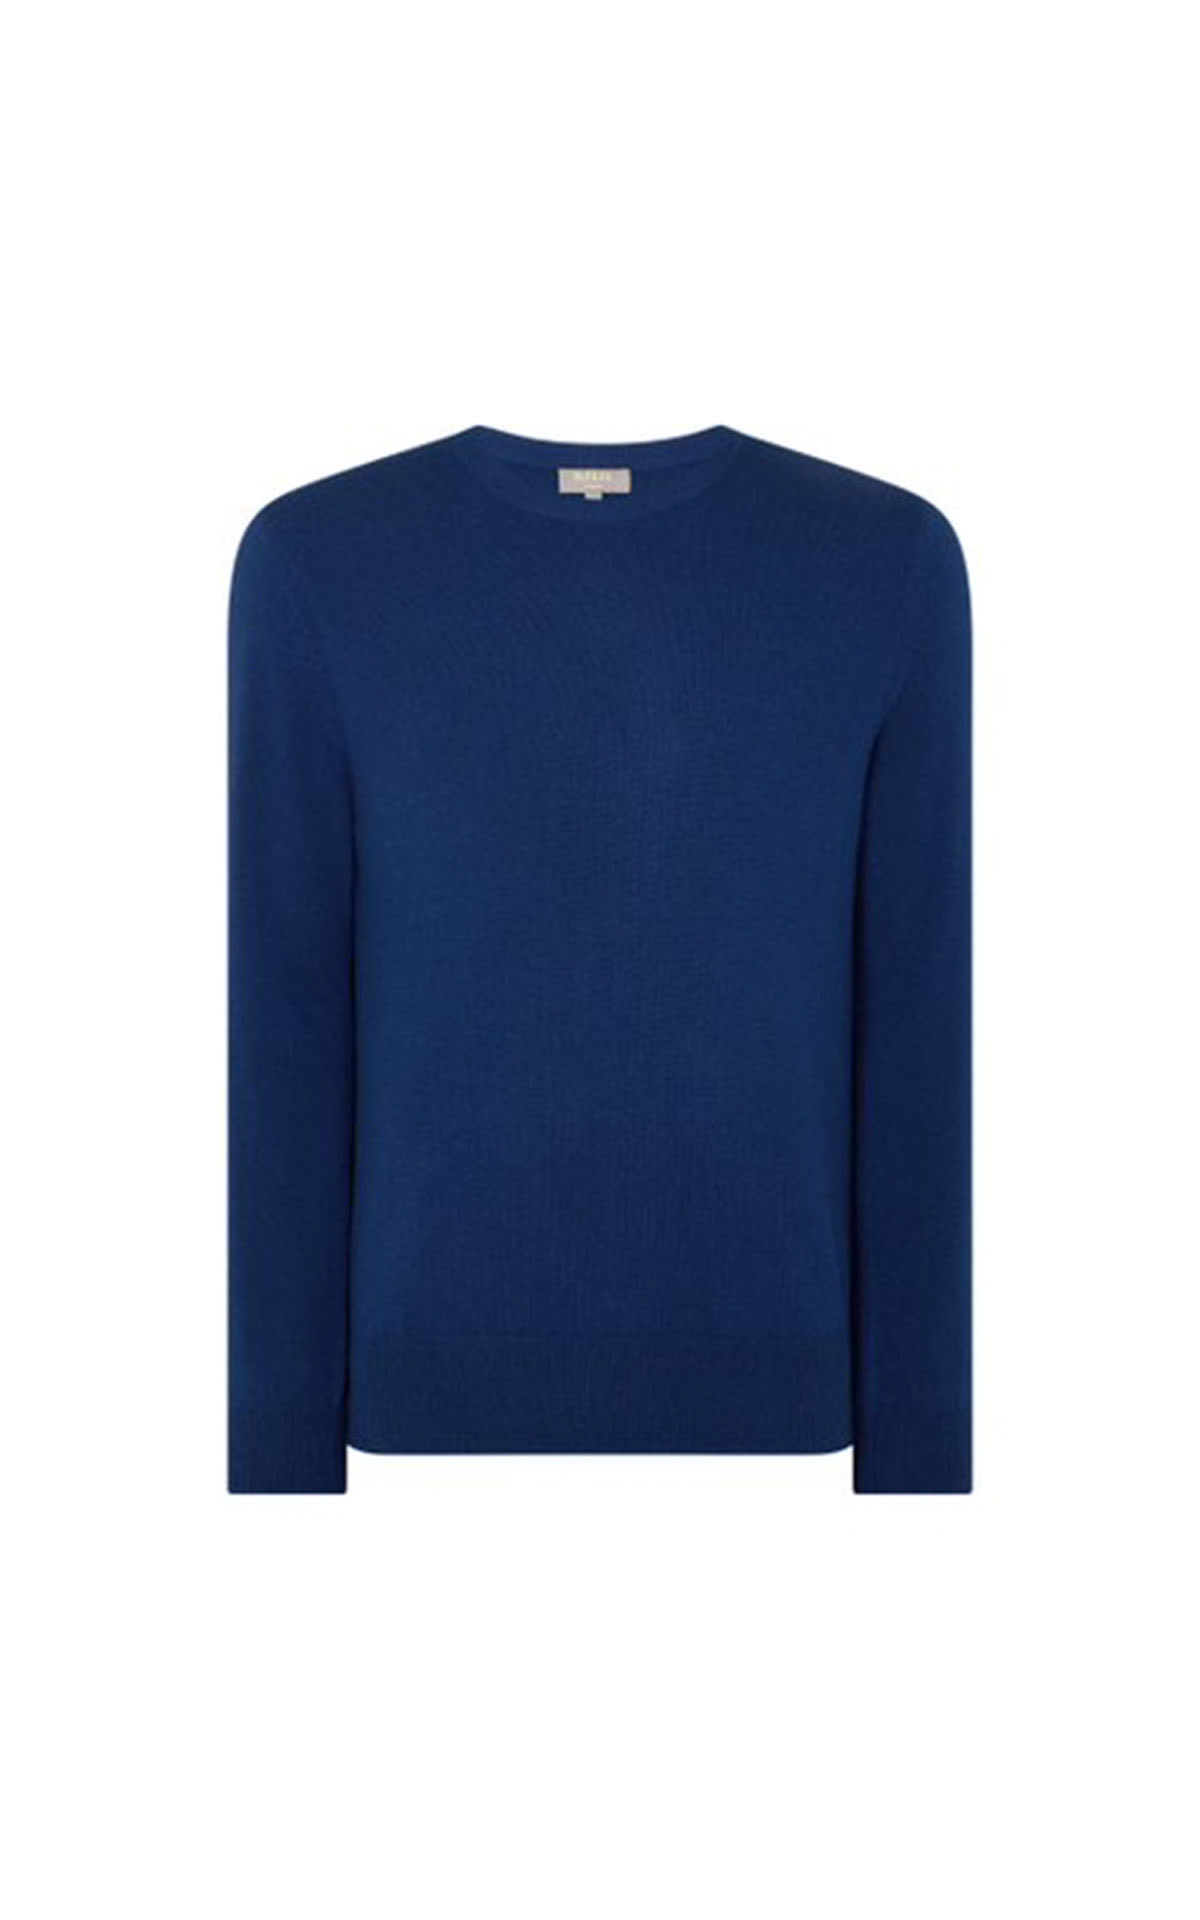 N.Peal Oxford round neck cruise blue from Bicester Village